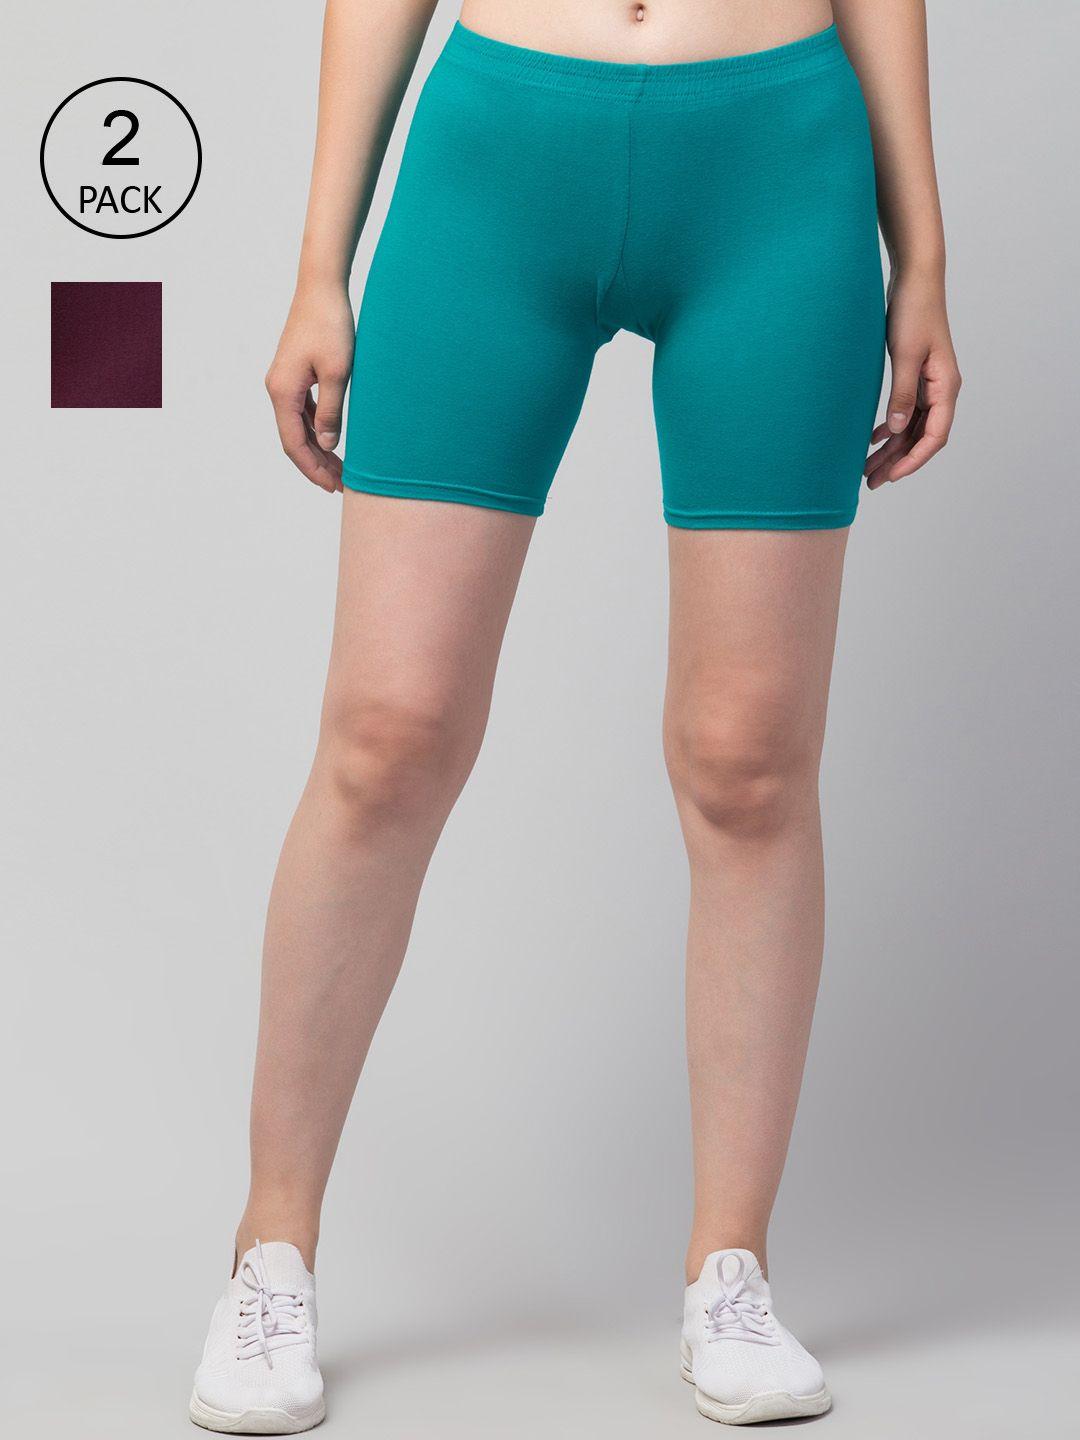 apraa & parma women teal & maroon pack of 2 skinny fit cycling pure cotton shorts